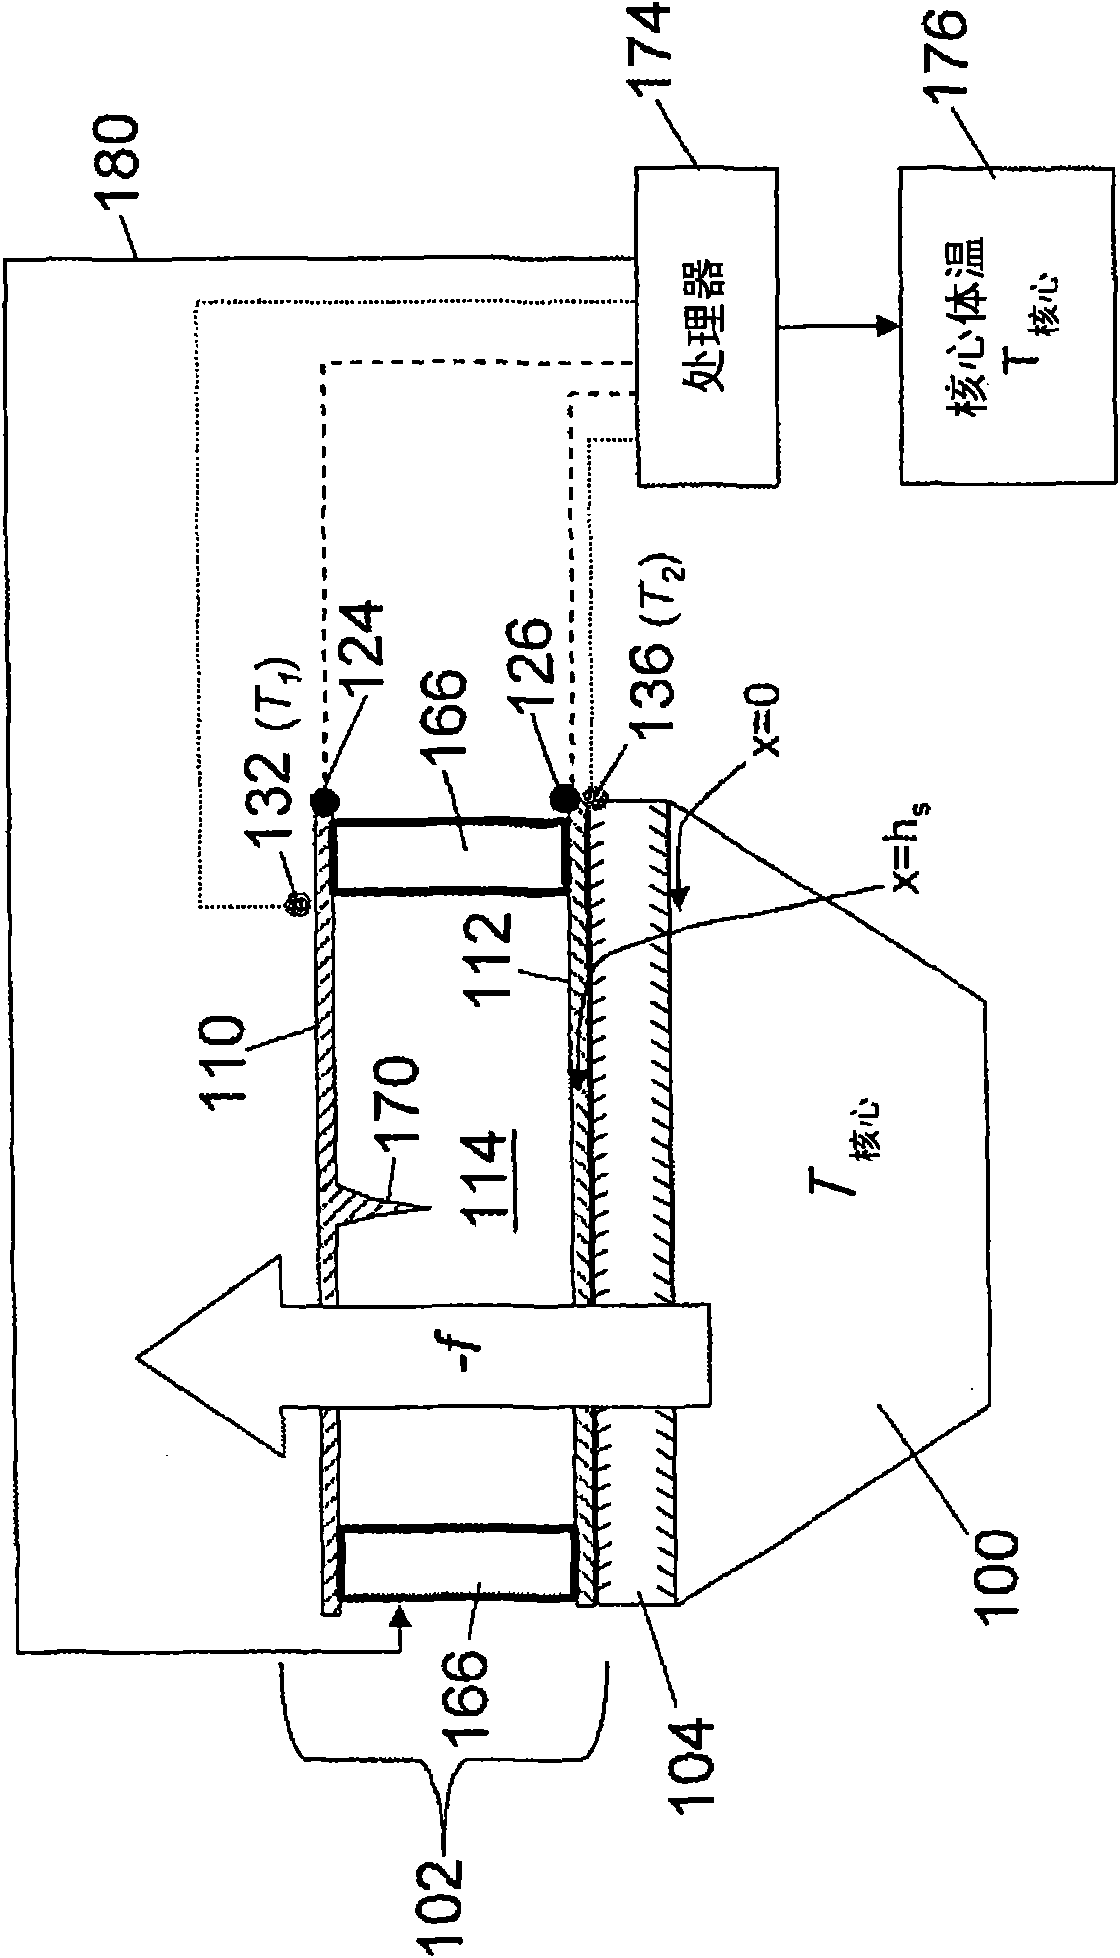 Apparatuses and methods for measuring and controlling thermal insulation